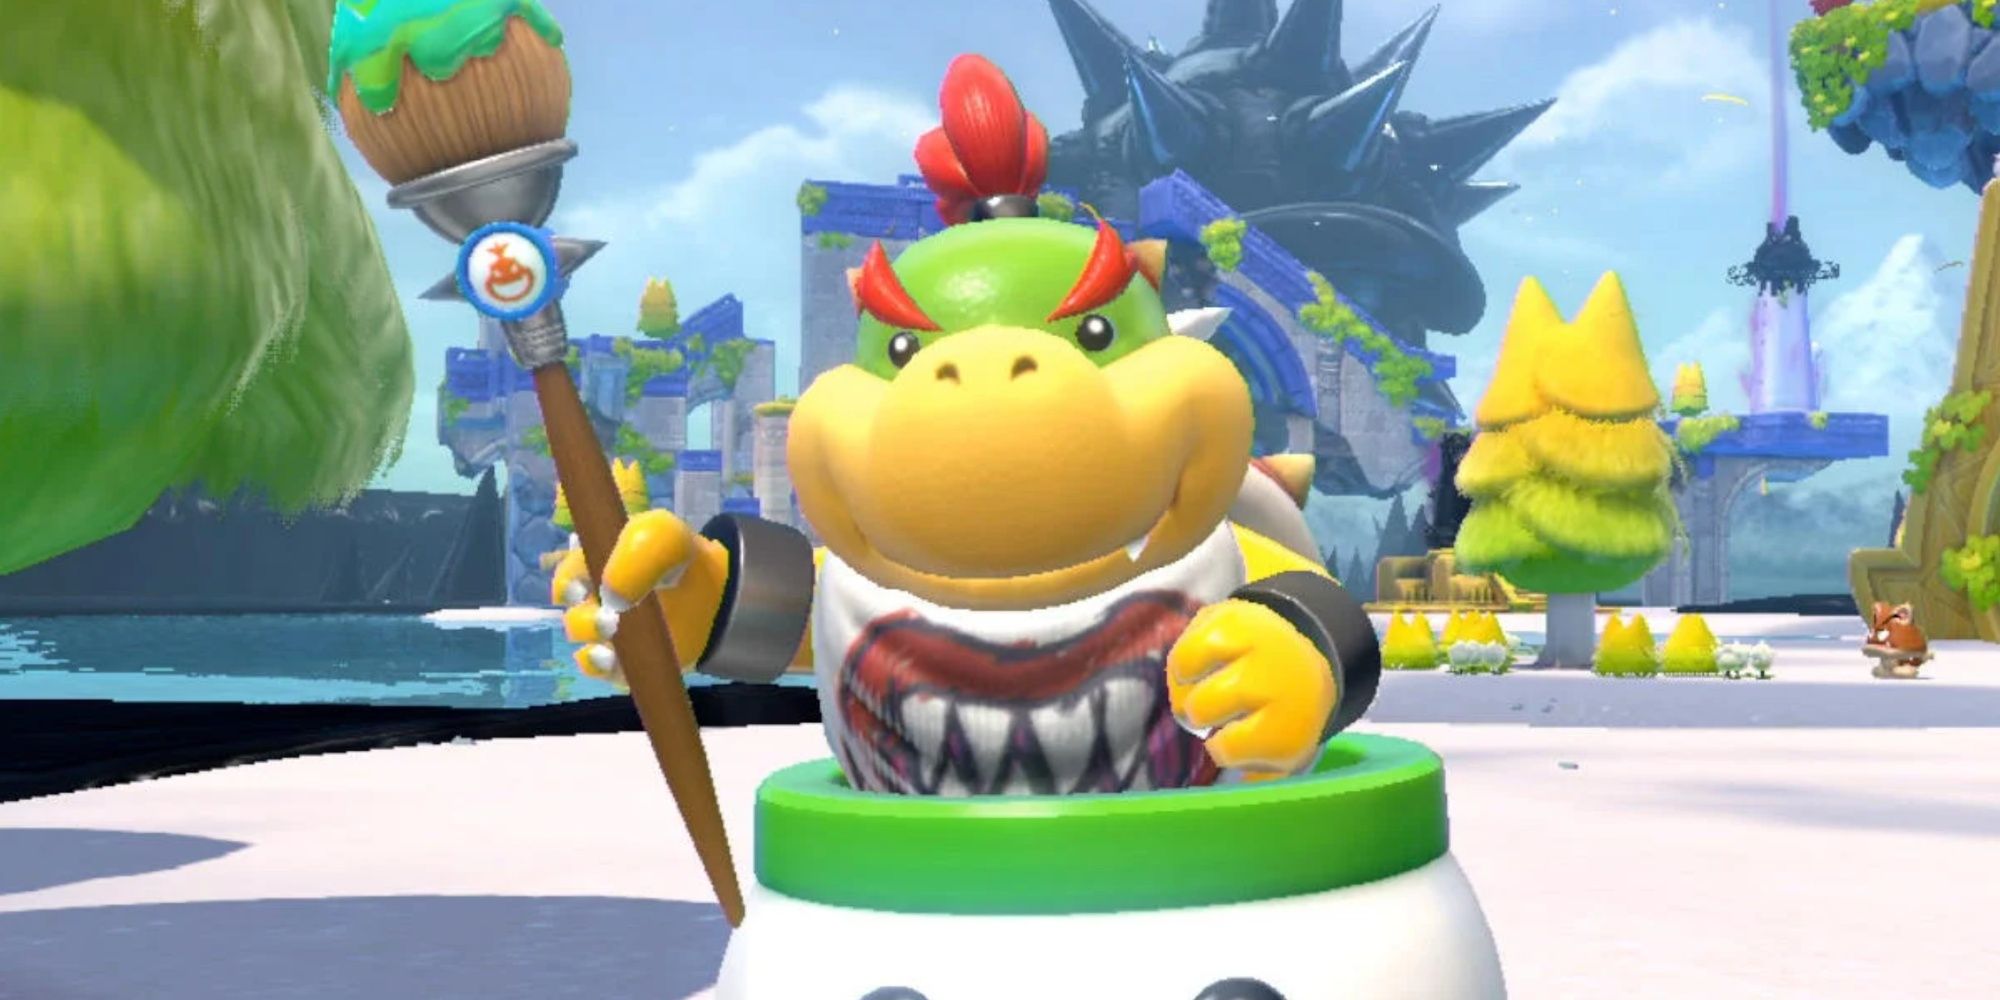 Bowser jr Looking Forward While Holding His Paint Brush